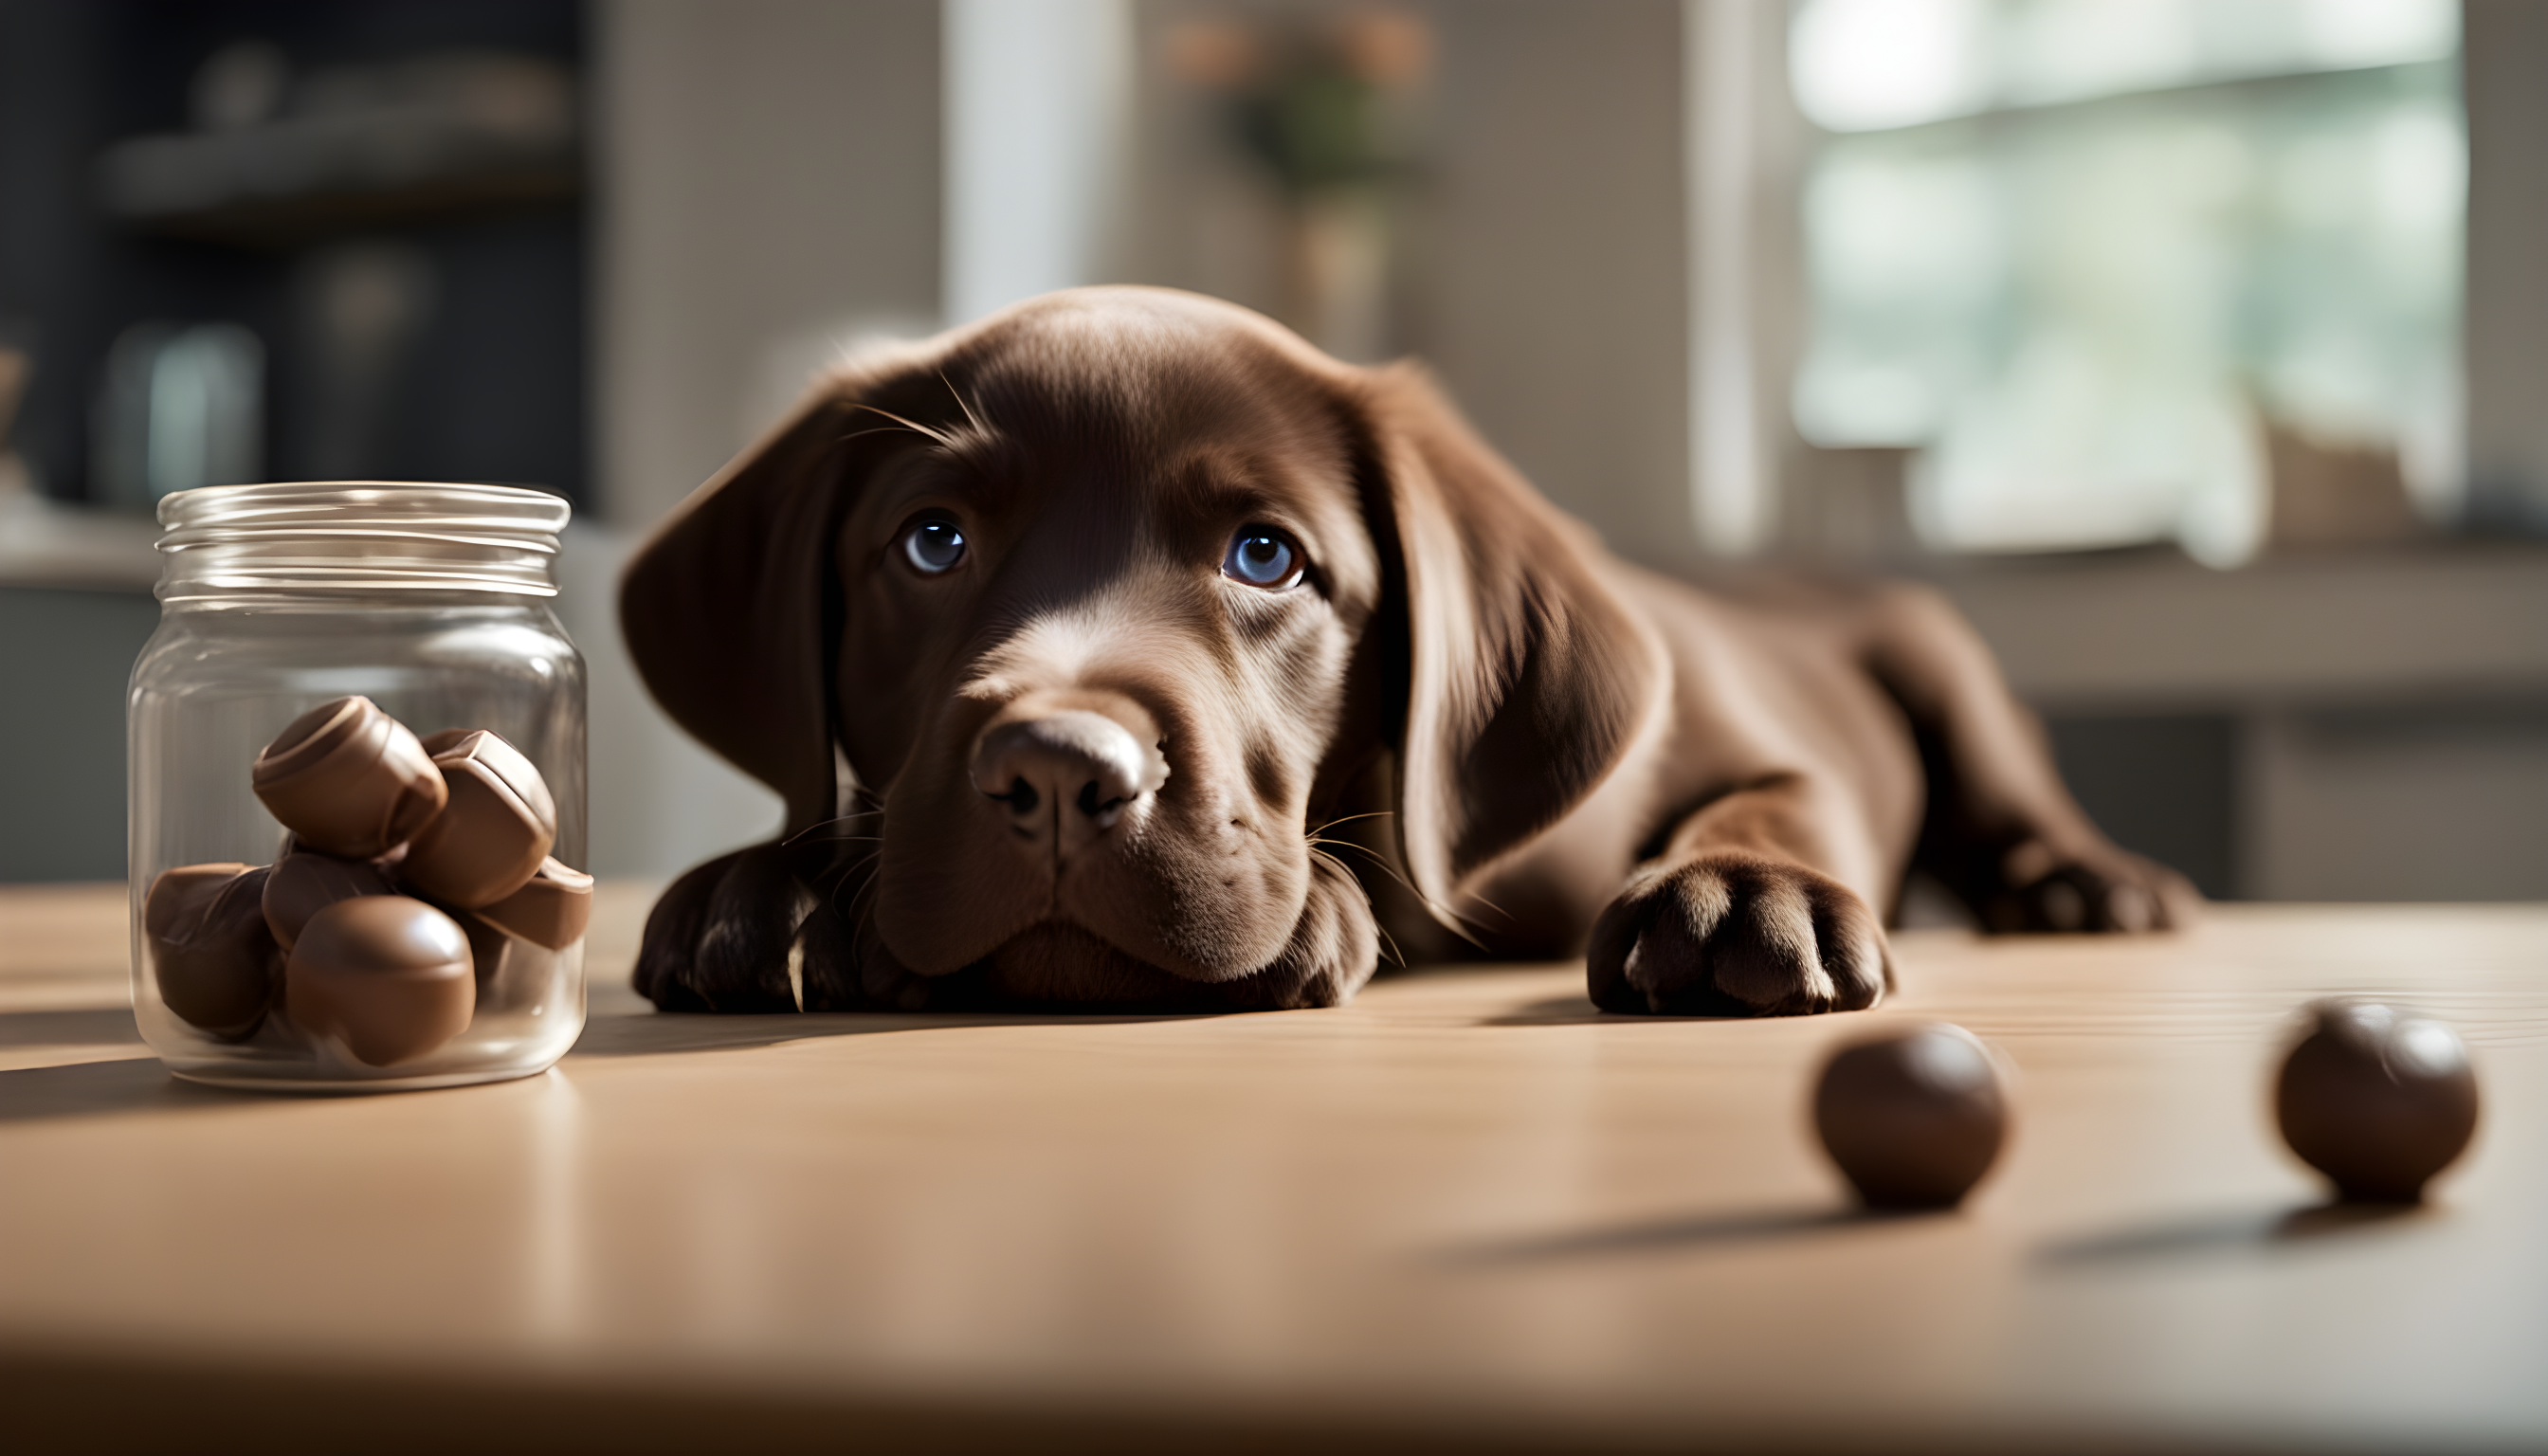 A Chocolate Lab puppy nailing the 'Sit' command like a champ, with a treat jar and clicker in the background for good measure.